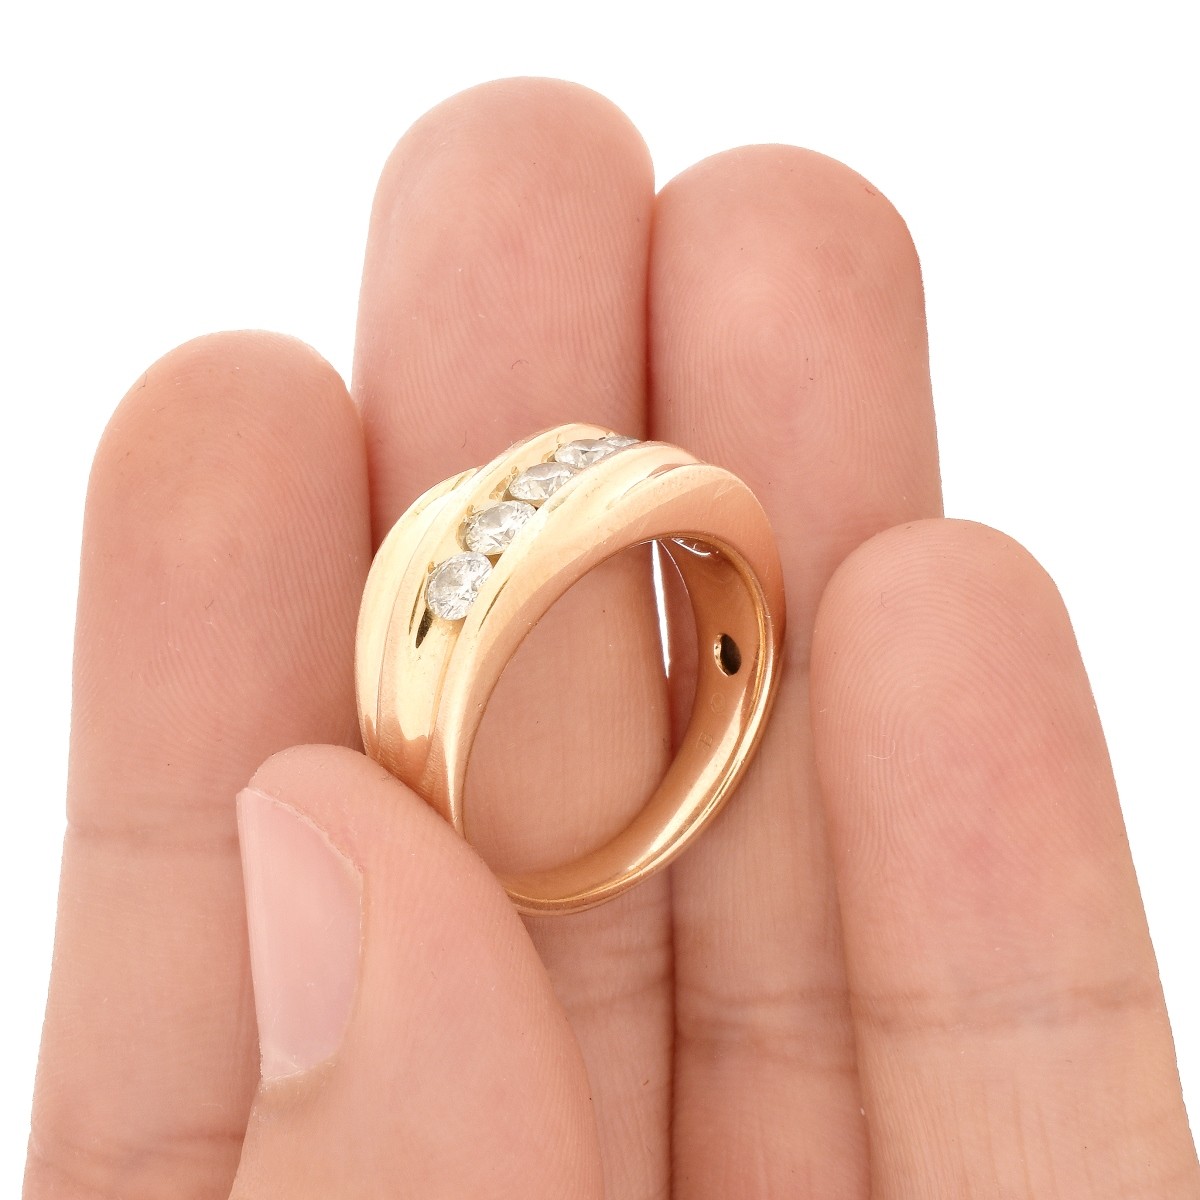 Man's 1.10ct Diamond and 14K Gold Ring